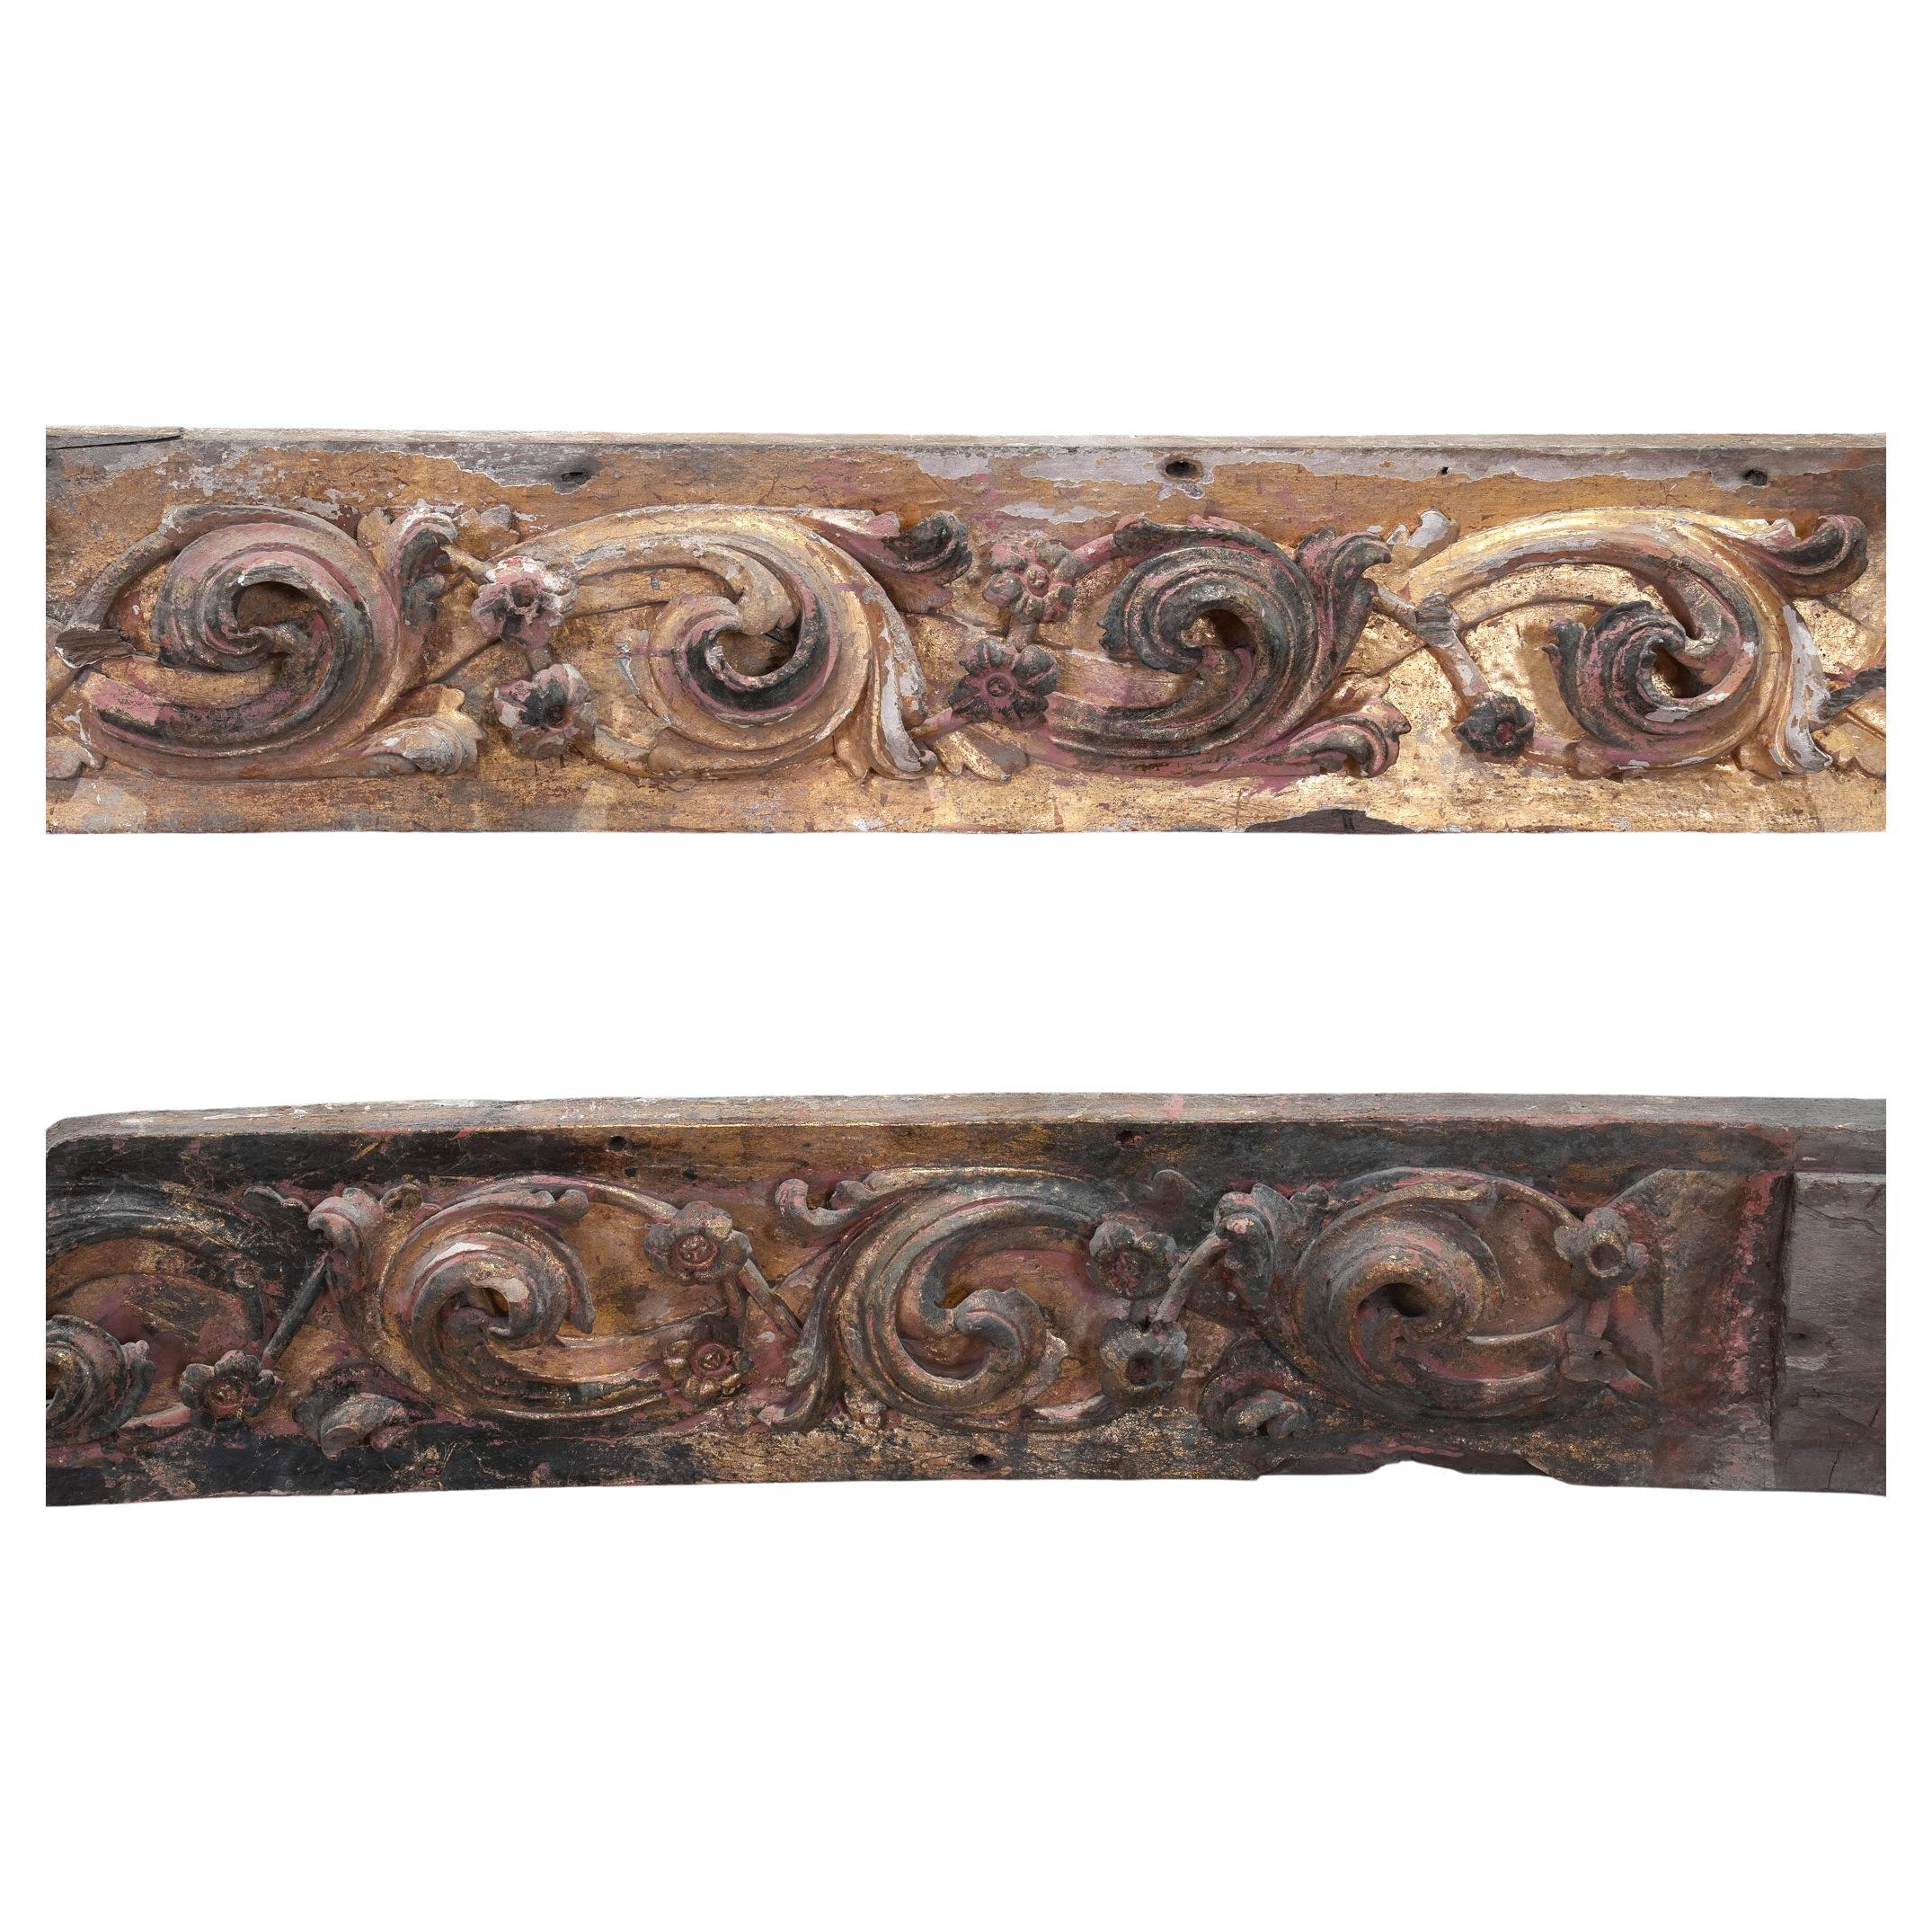 A Pair of Slim 18th Century Portuguese Baroque Carved Panels